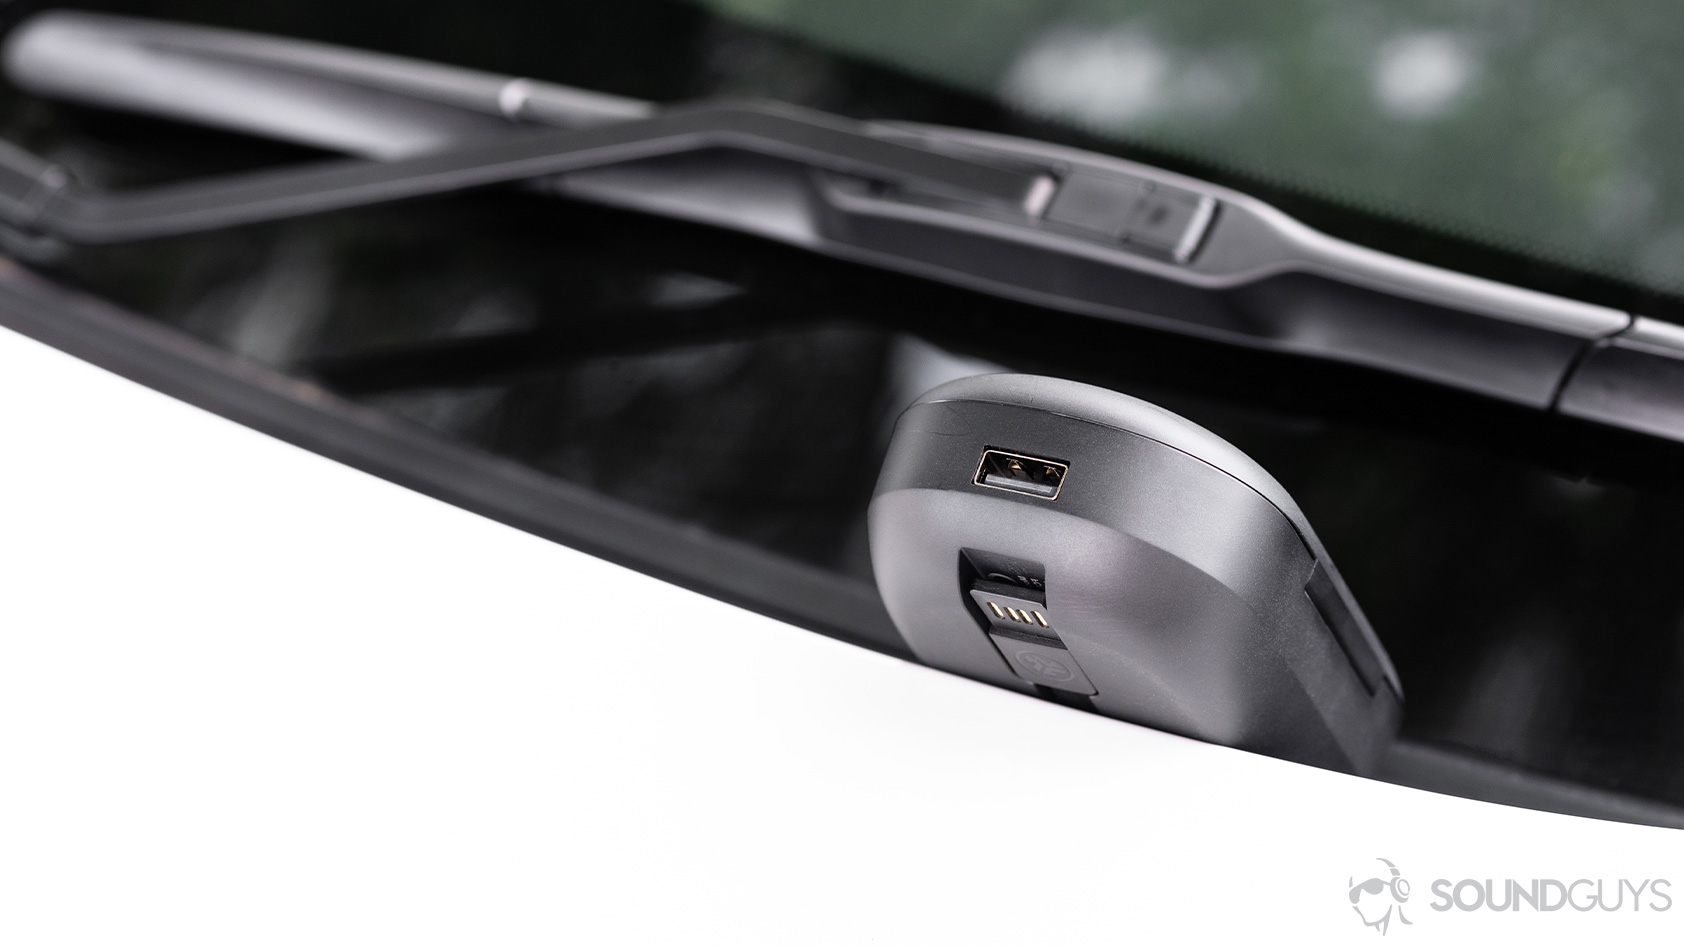 The USB-A input and USB cable visible on the JLab Epic Air Sport charging case, which is resting on a car windshield.